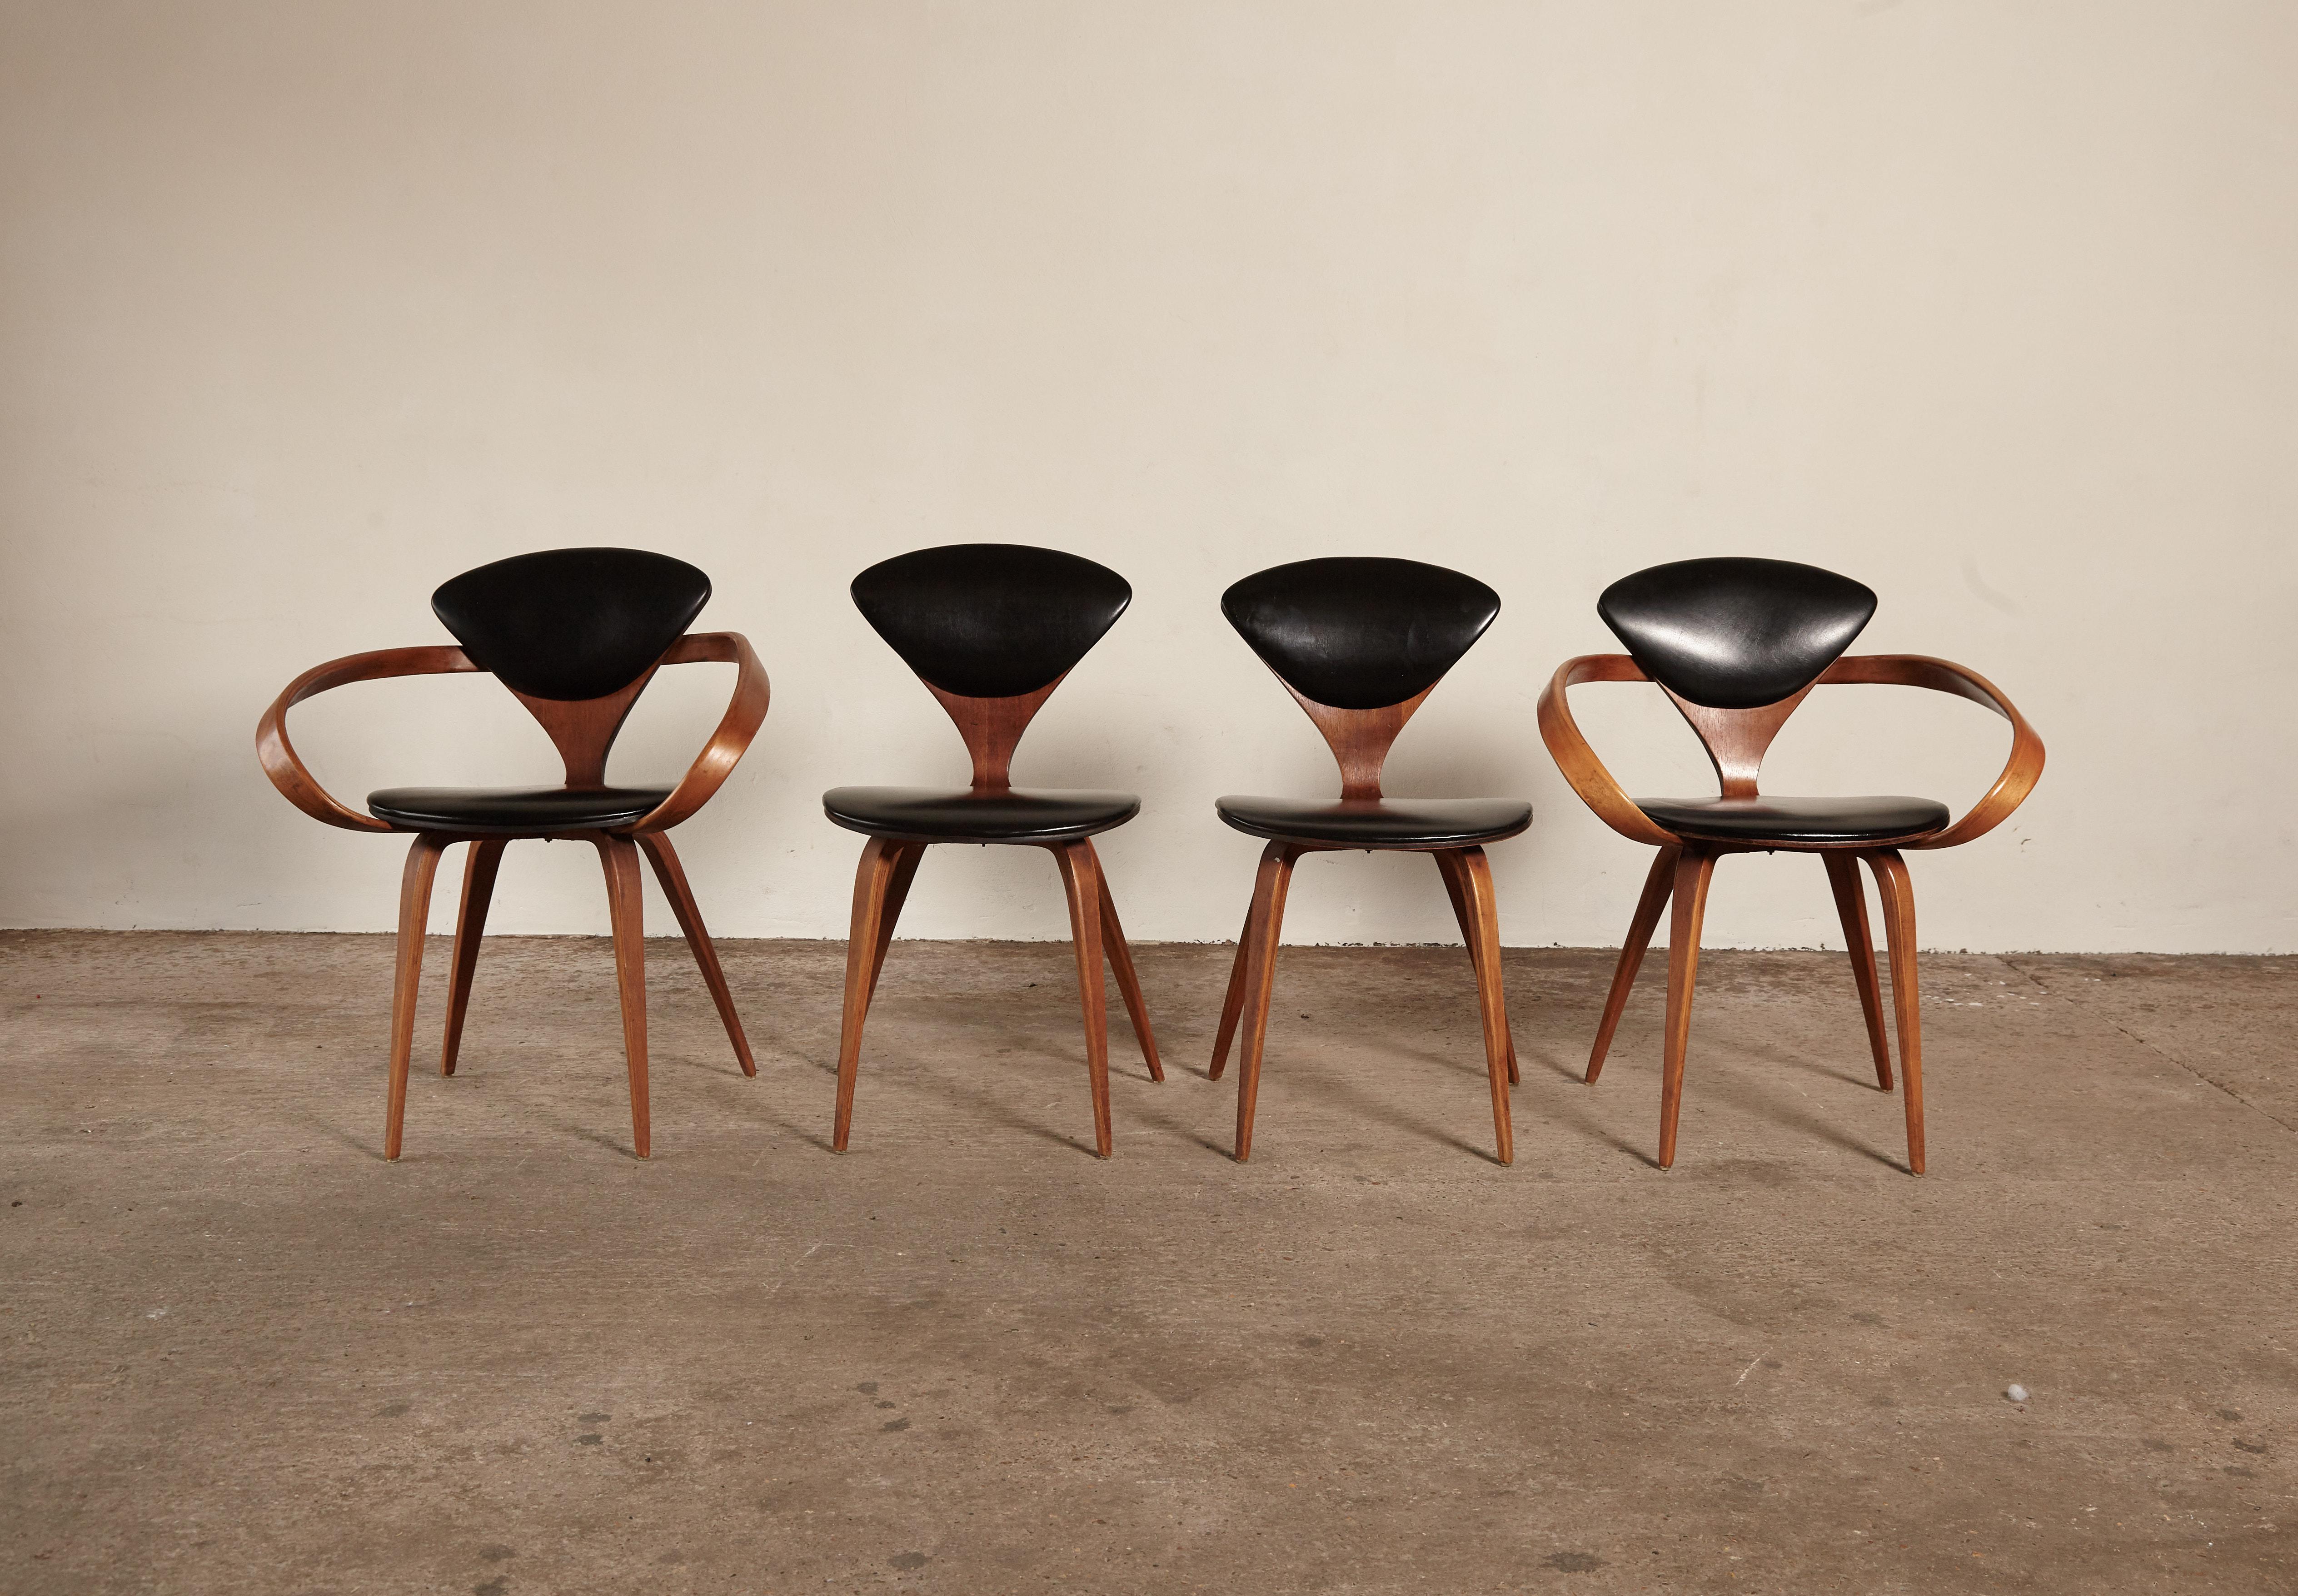 American Set of Four Norman Cherner Dining Chairs, Made by Plycraft, USA, 1960s